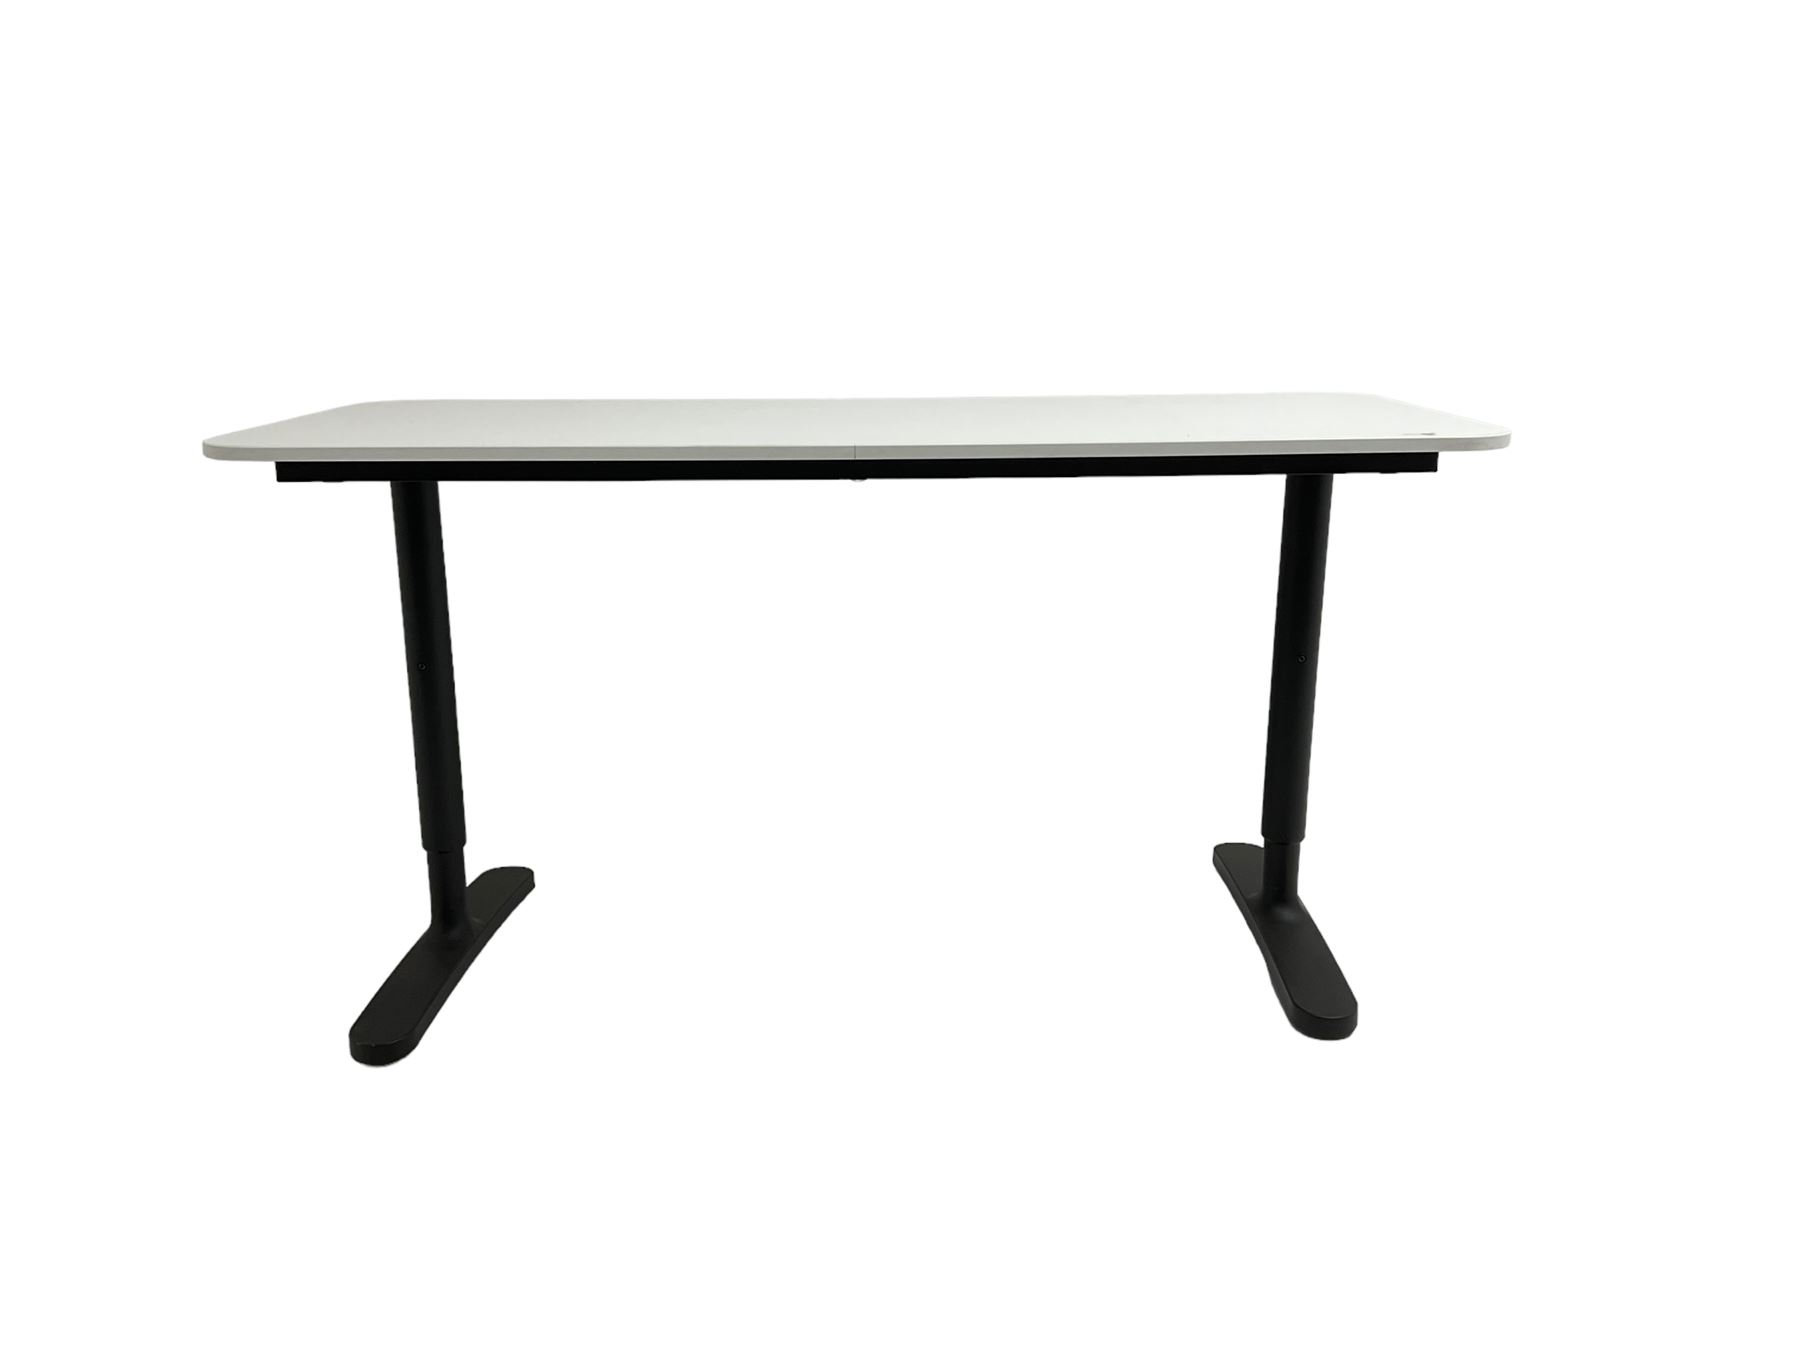 IKEA - contemporary table with white finish top